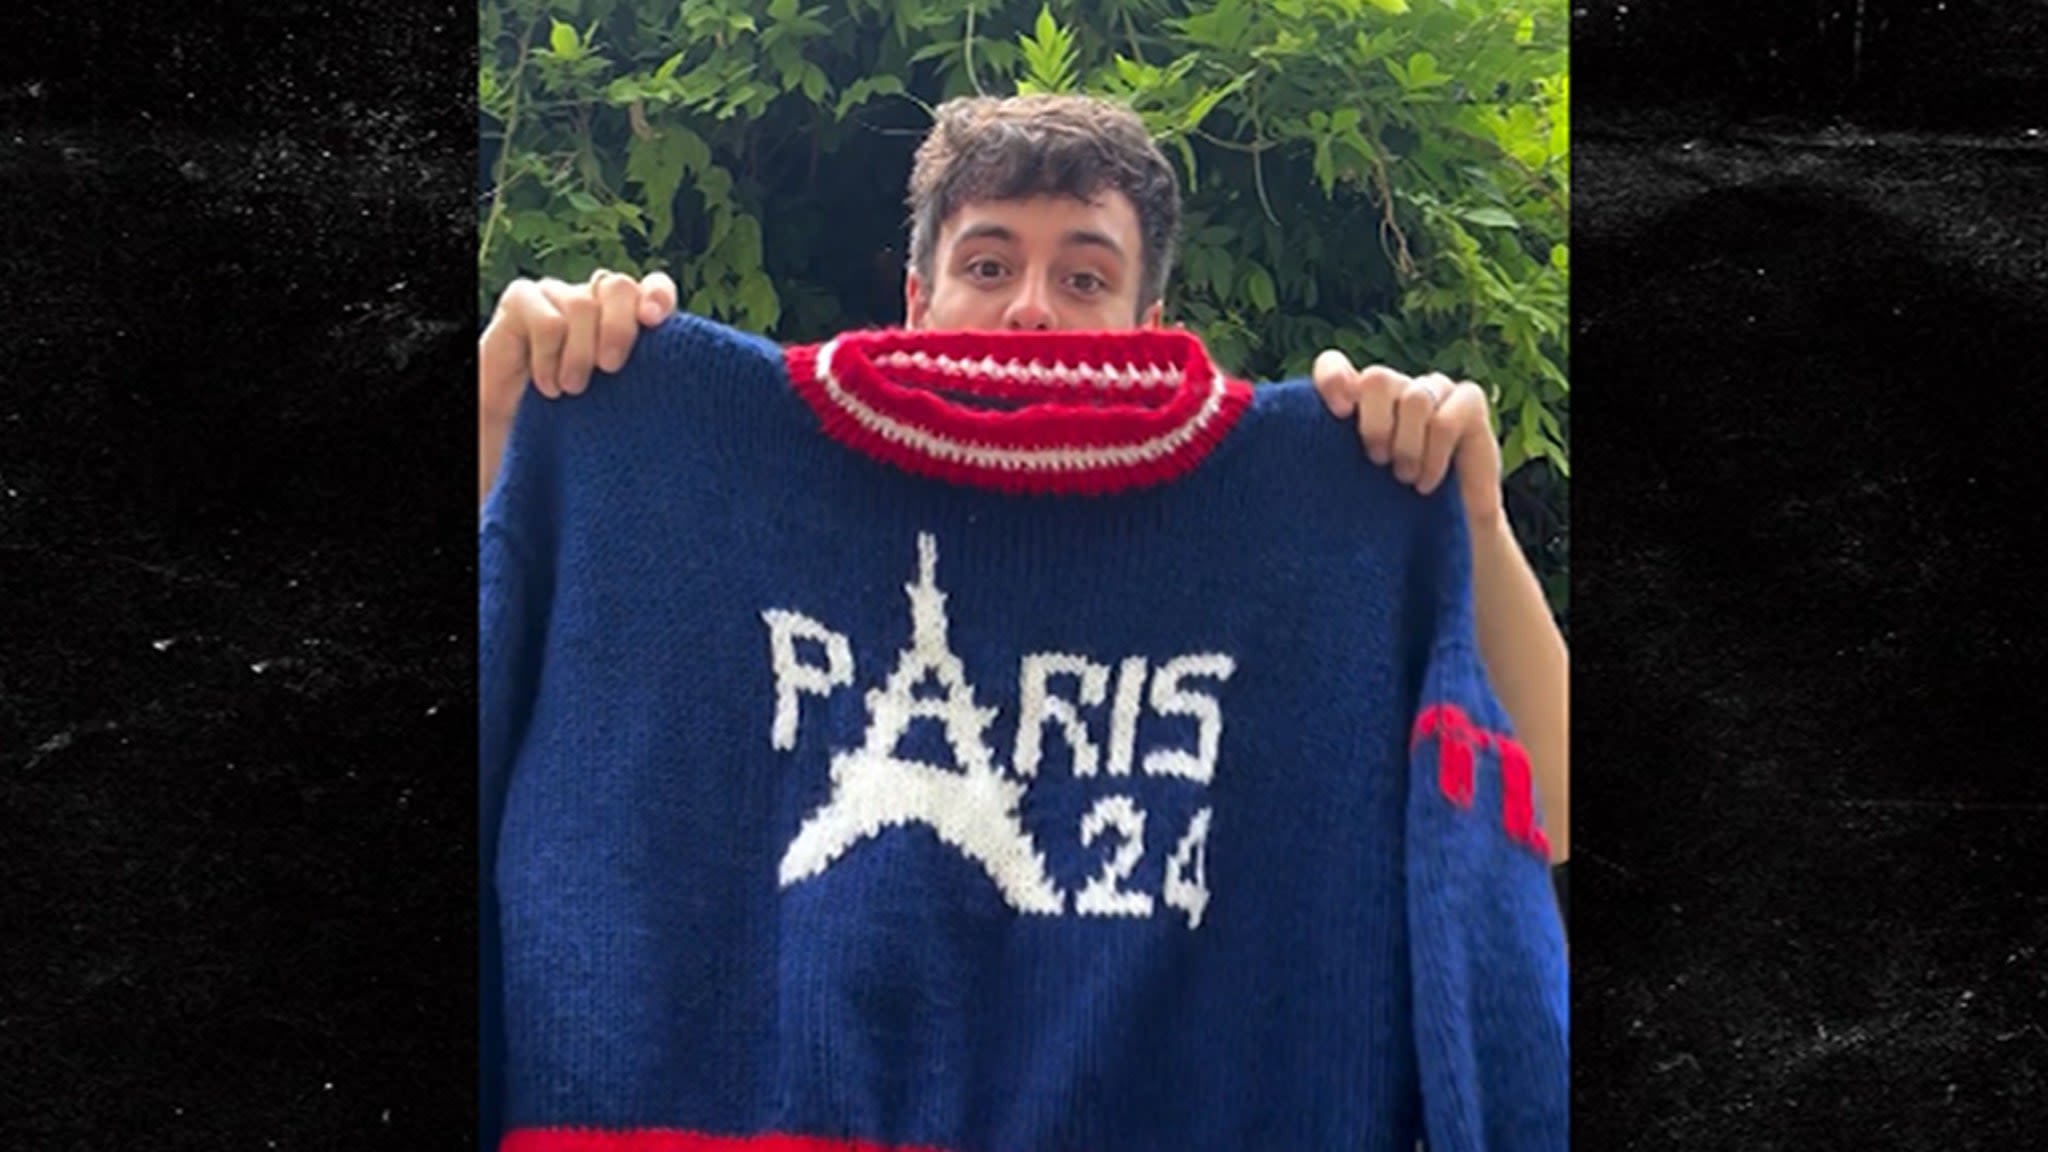 Tom Daley Finishes Knitting Paris Olympics Sweater, Models It For Followers